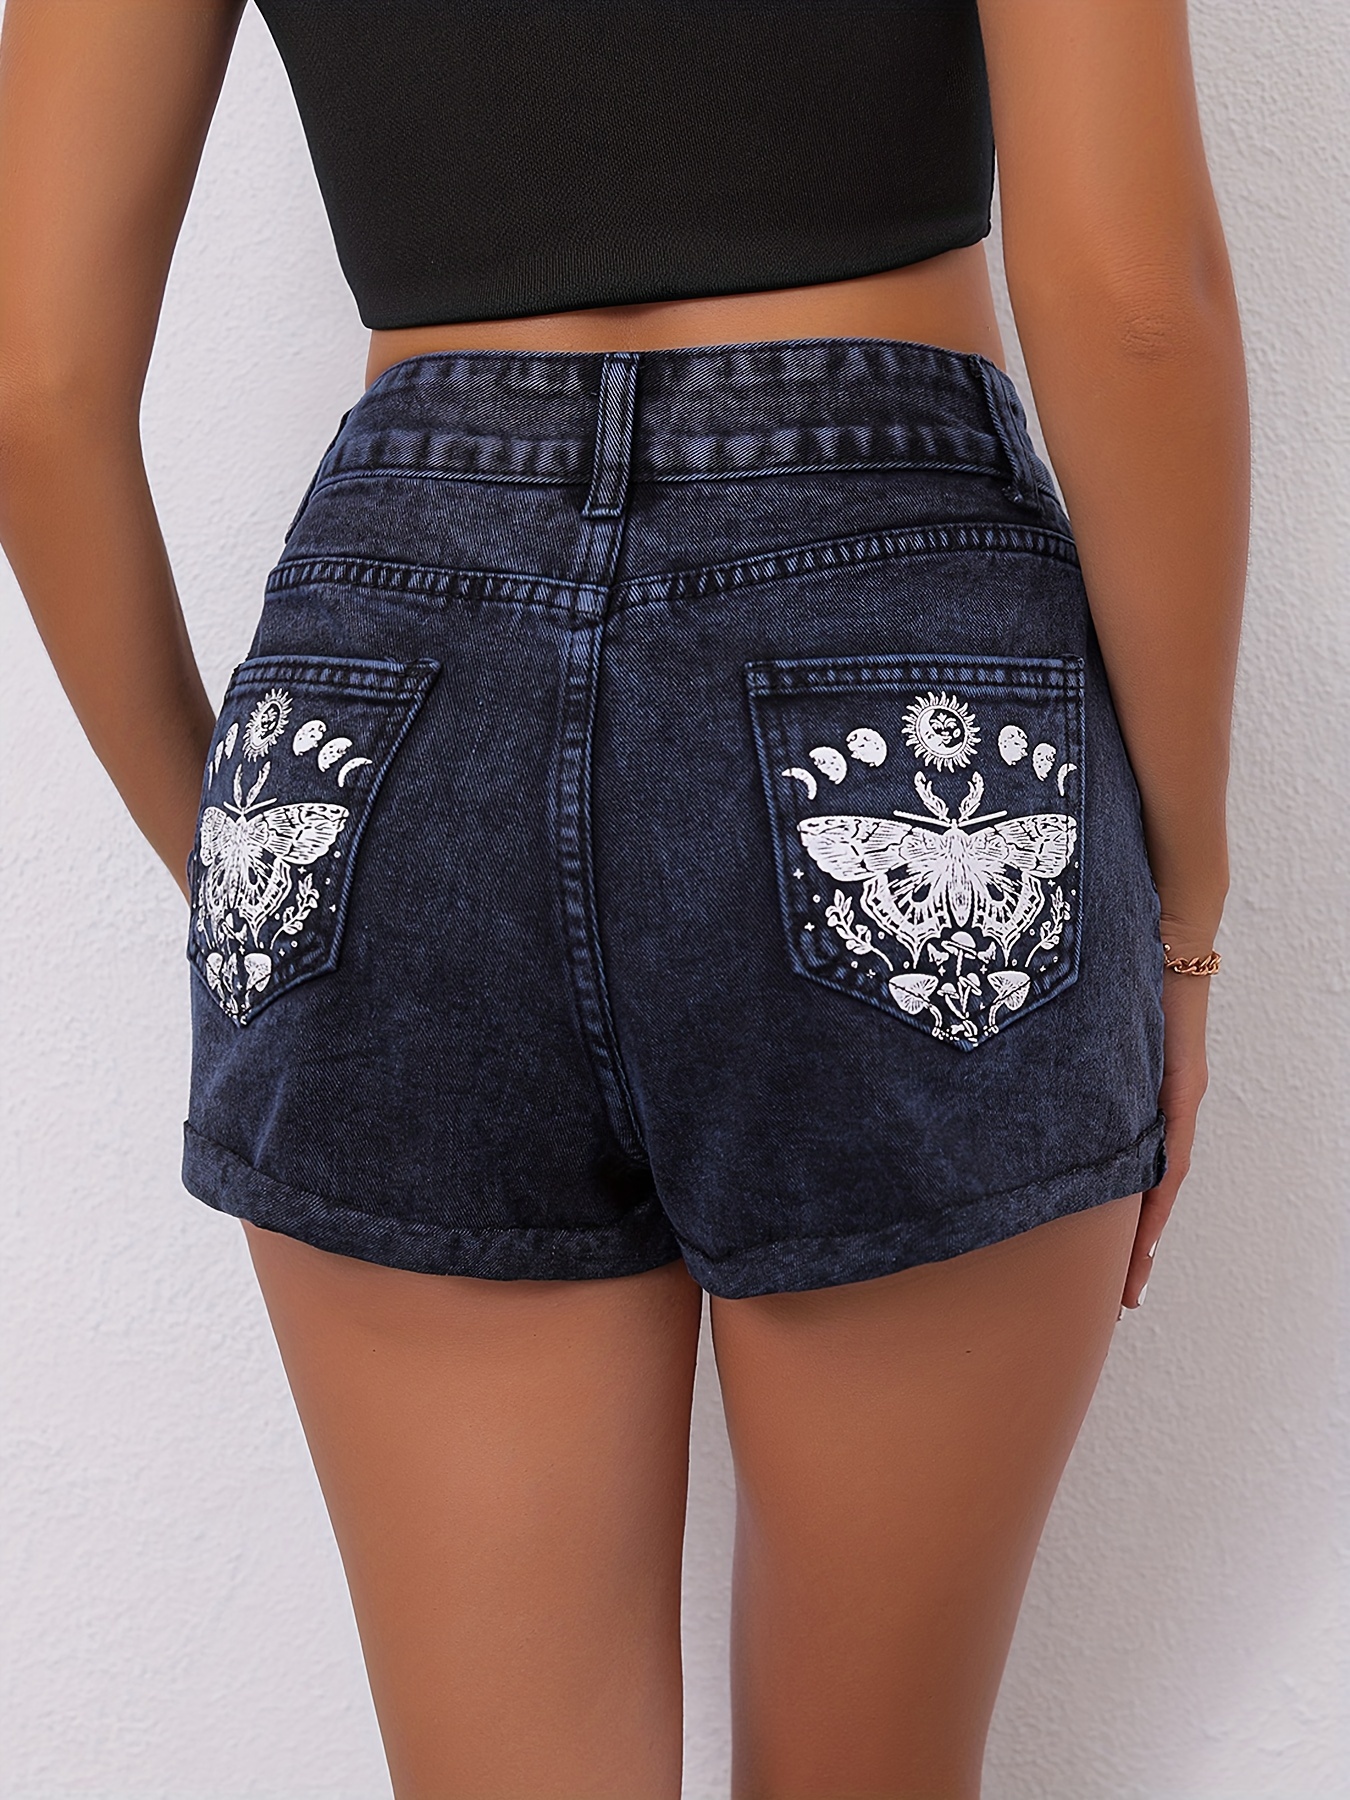 Women's Lace-up Low Waist Jeans Shorts Summer Casual Stretchy